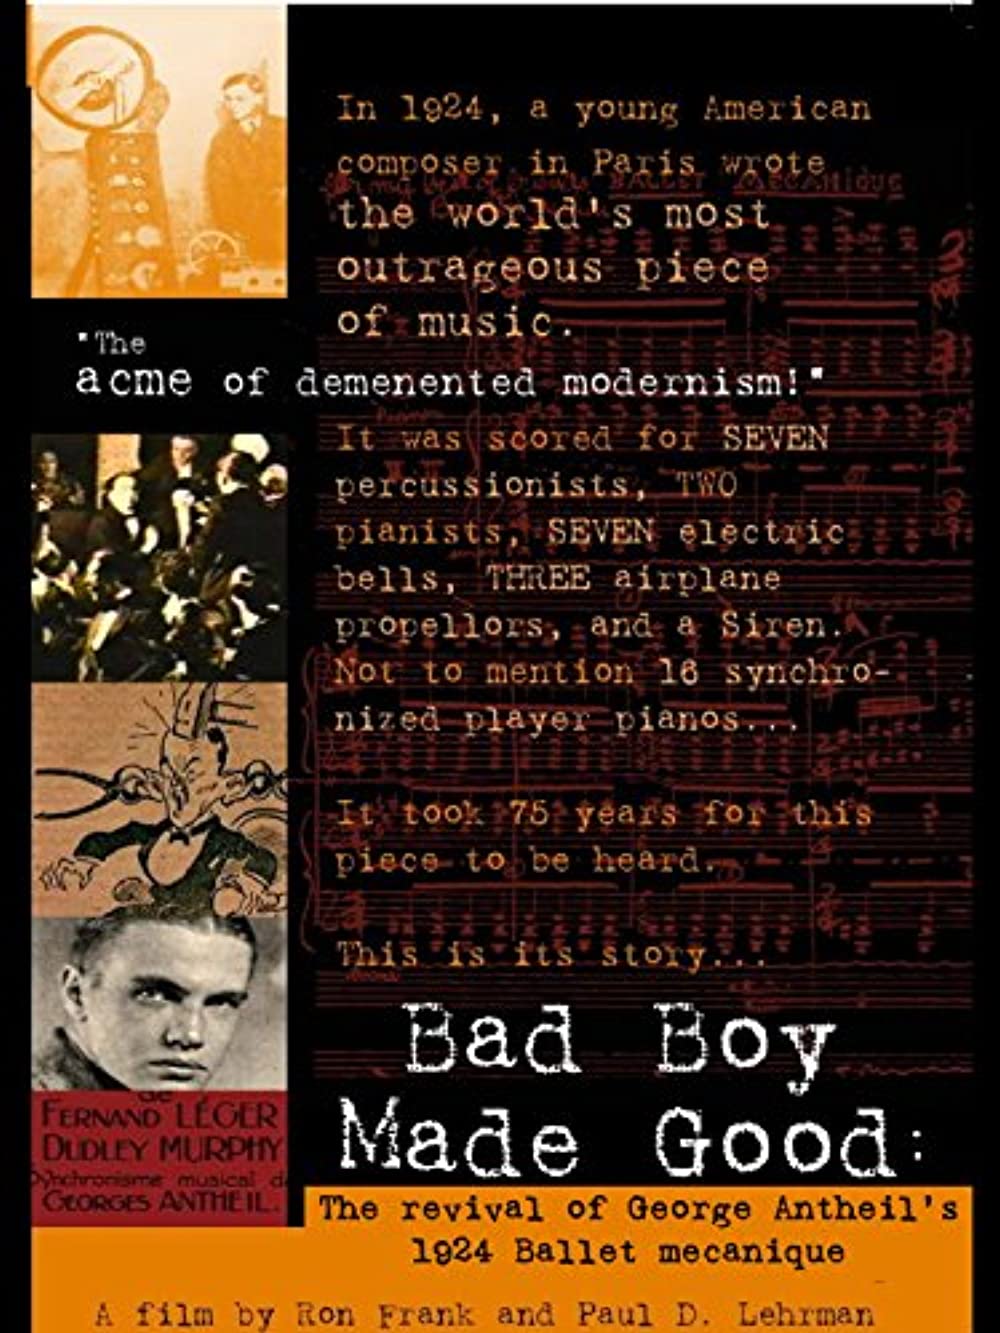 Download Bad Boy Made Good: The Revival of George Antheil's 1924 Ballet Mécanique Movie | Watch Bad Boy Made Good: The Revival Of George Antheil's 1924 Ballet Mécanique